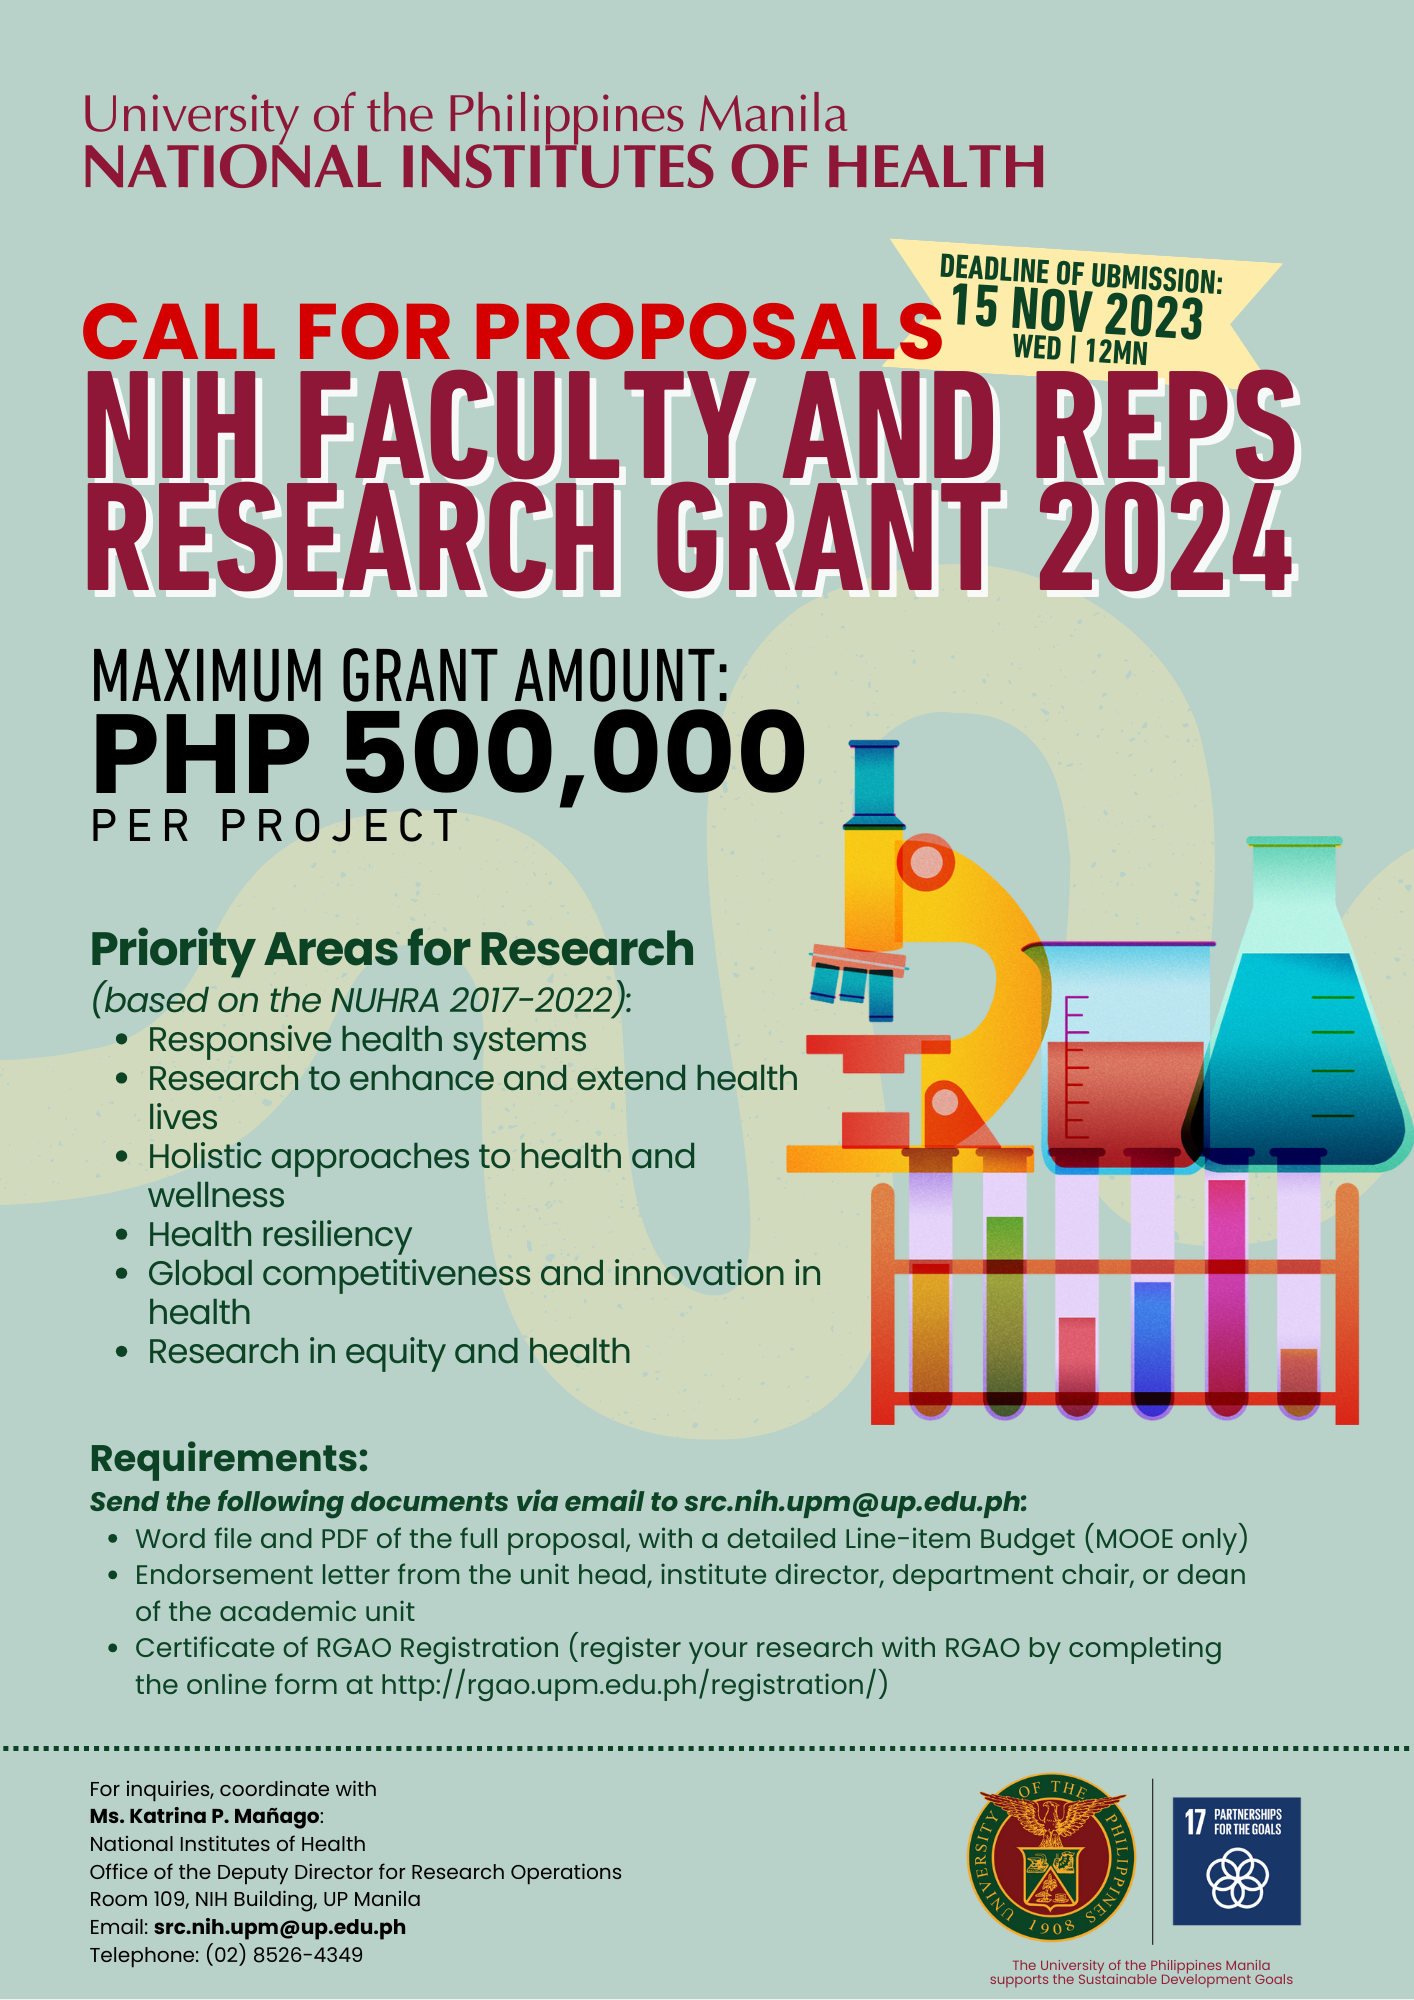 Call for Proposals for Funding by the NIH Faculty and REPS Research